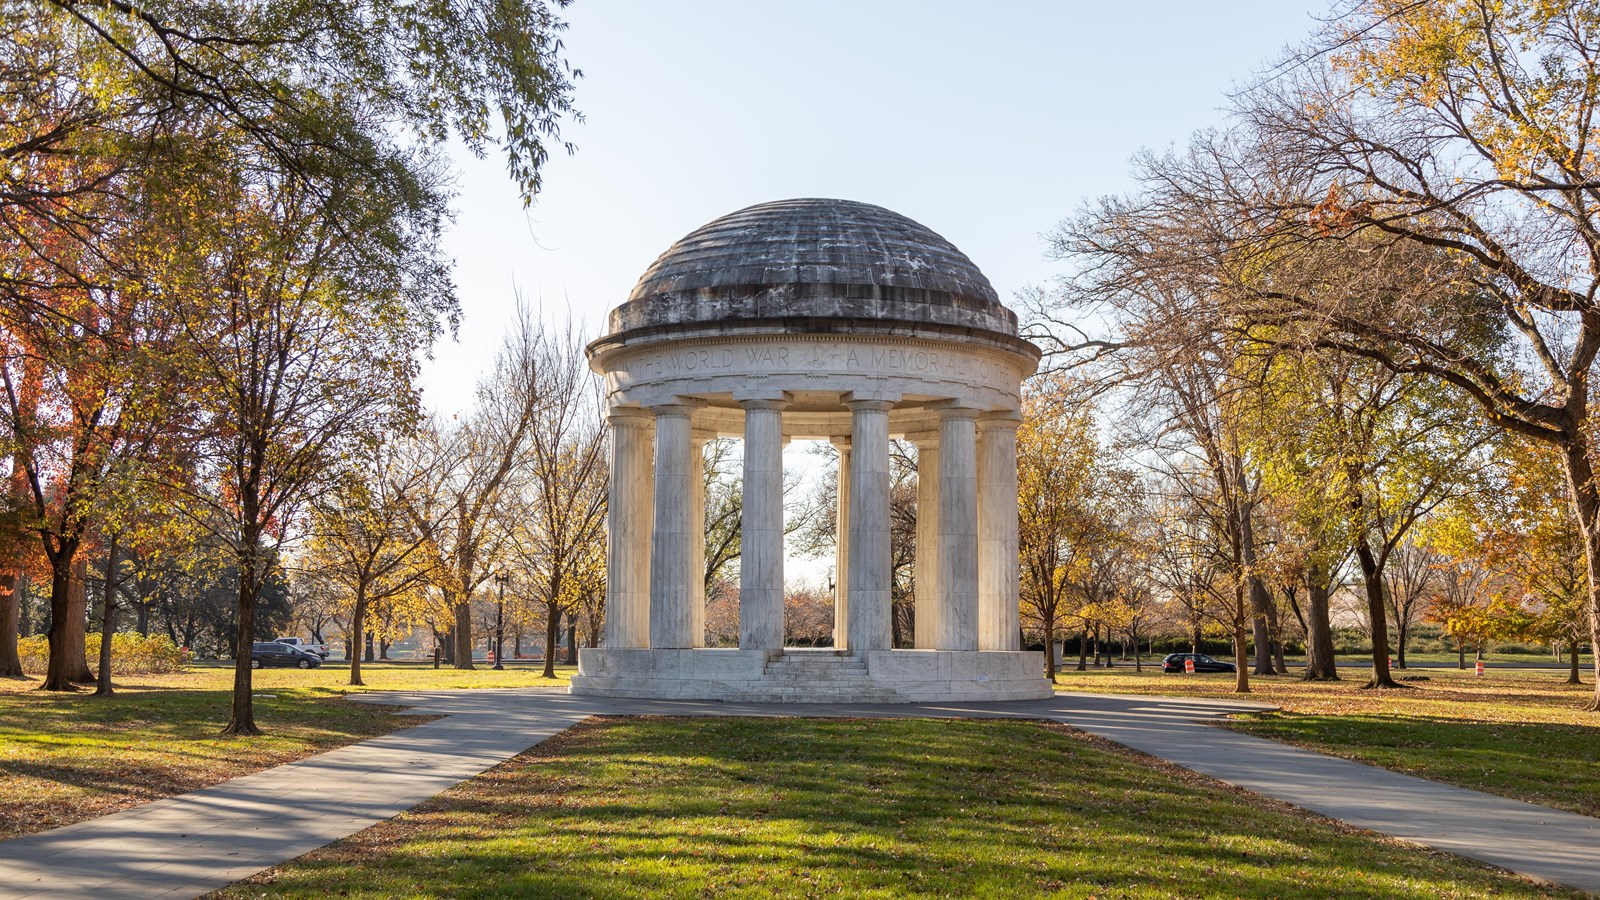 A circle of white columns topped with a dome, flanked by trees.